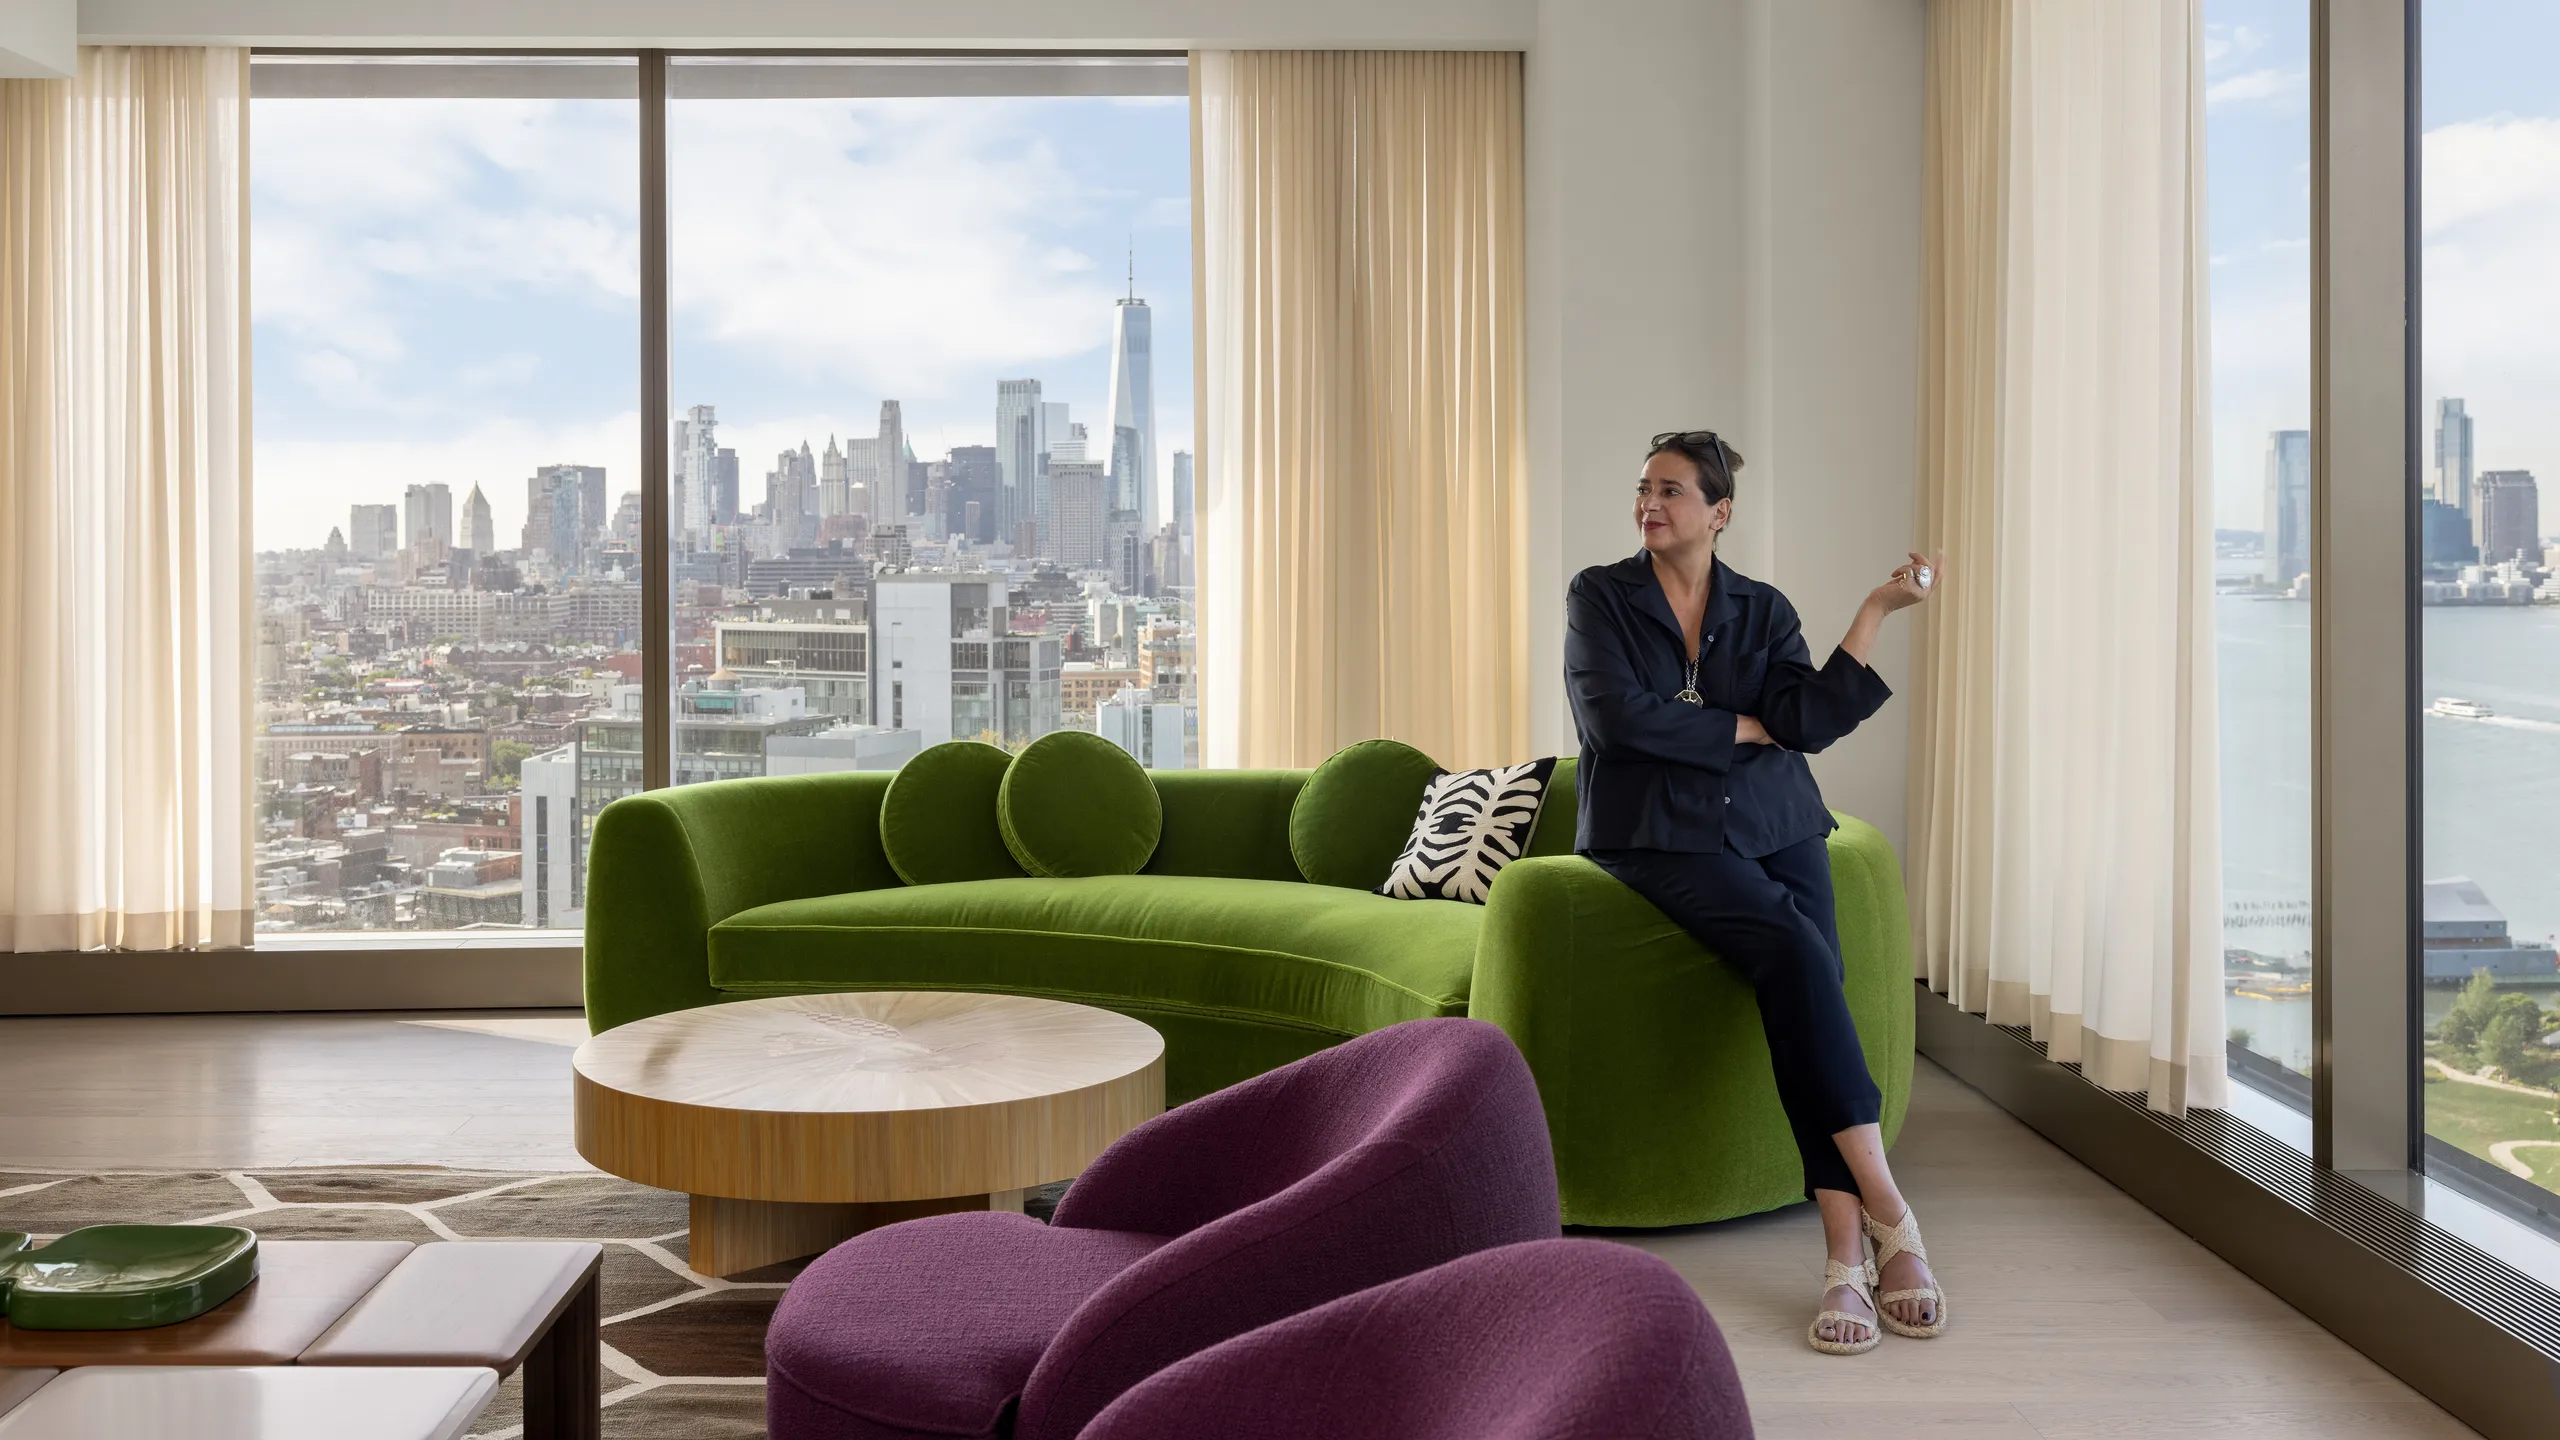 Women In Interior Design: Breaking Barriers And Shaping The Industry